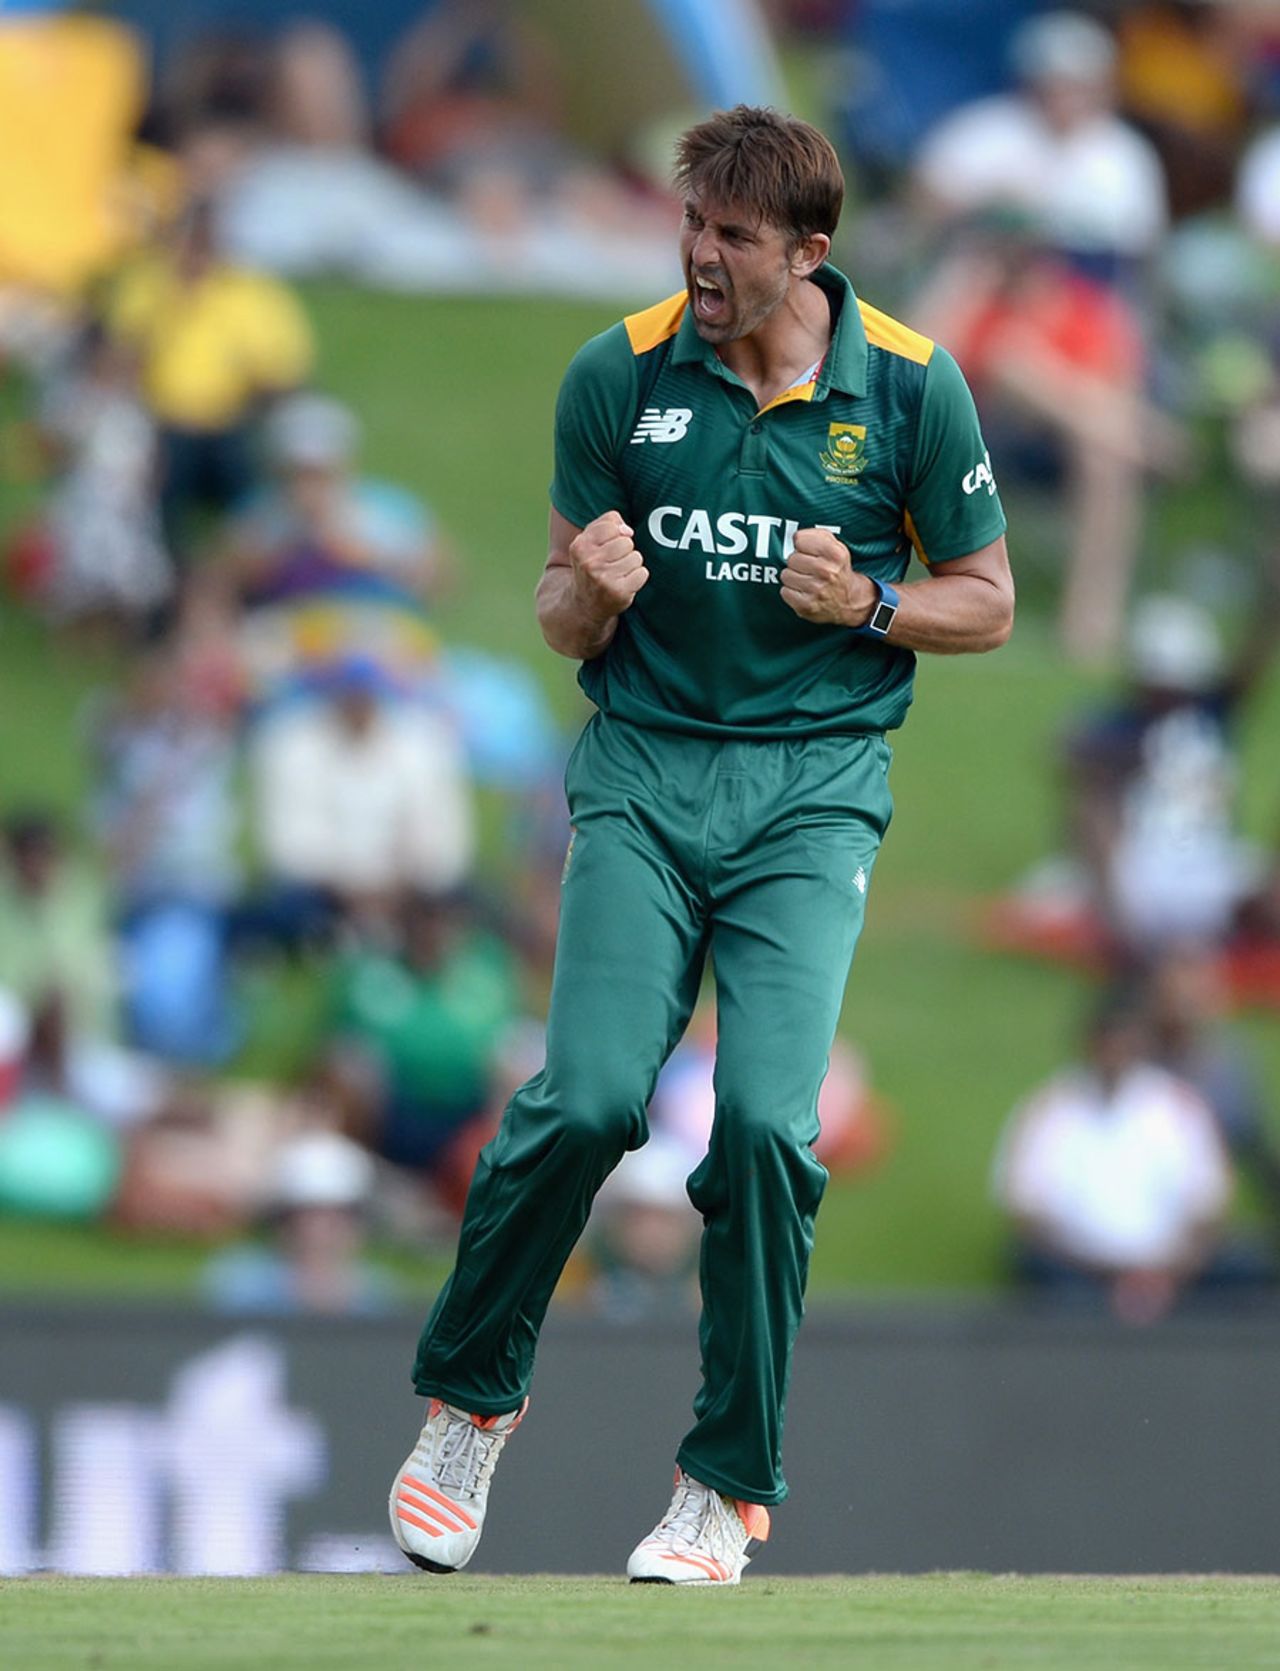 David Wiese celebrates the wicket of Eoin Morgan, South Africa v England, 3rd ODI, Centurion, February 9, 2016